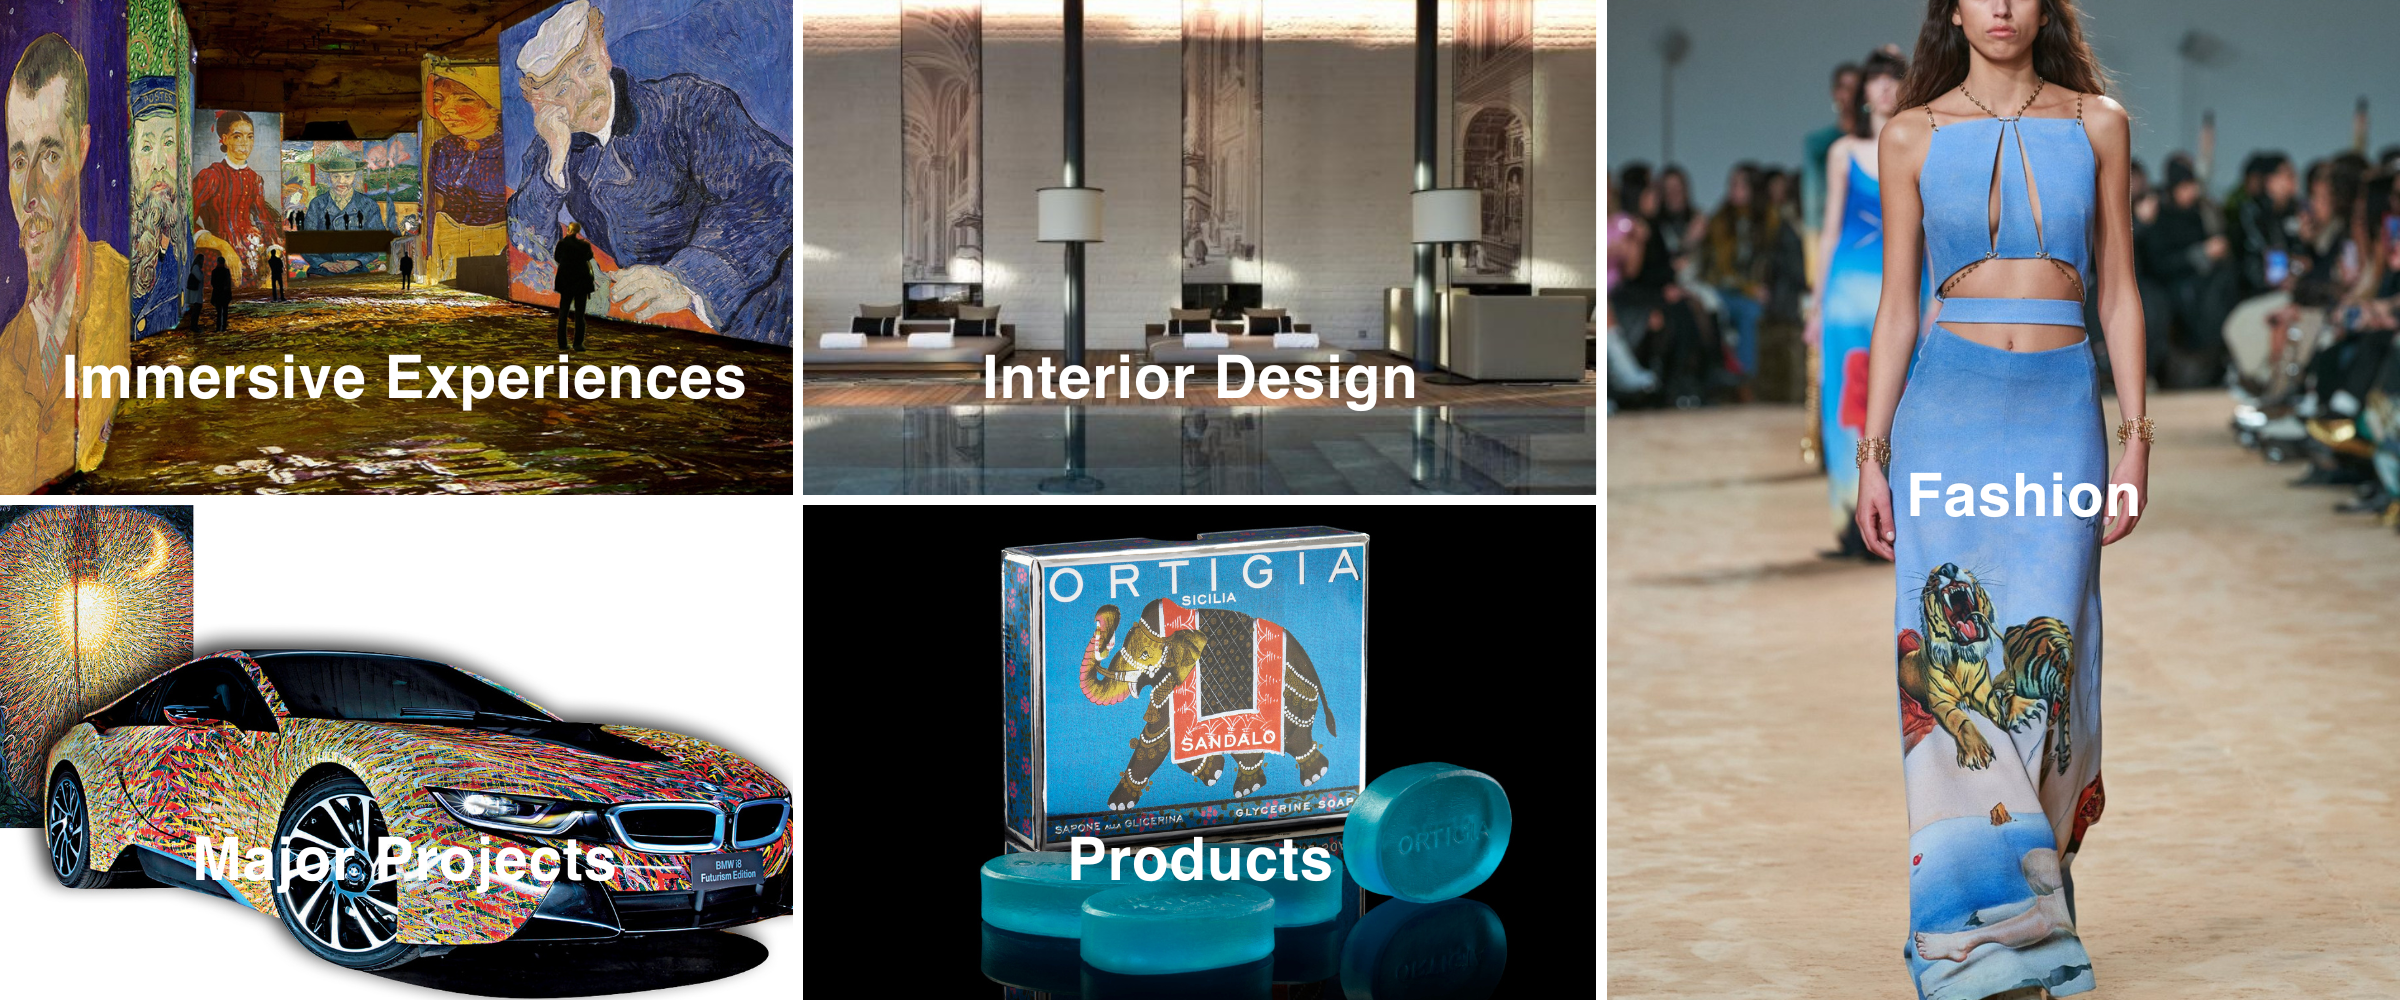 Immersive Experiences, Interior Design, Fashion, Major Projects, Products at Bridgeman Images